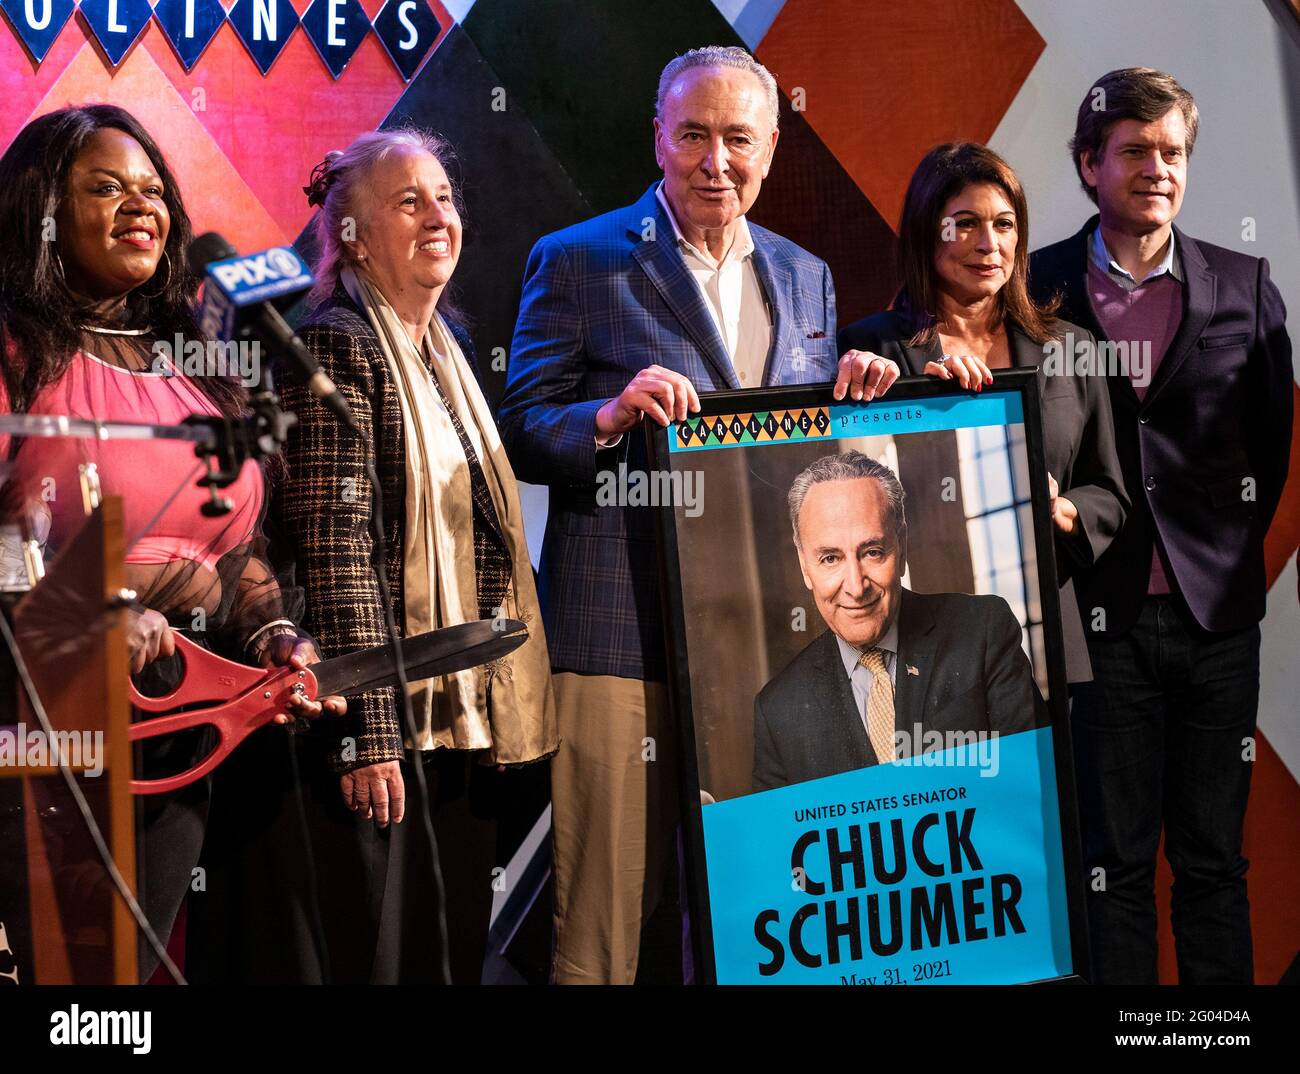 New York, United States. 31st May, 2021. U. S. Senator Charles Schumer holds poster presented to him at Carolines on Broadway comedy club re-opening after pandemic ceremony. Senator Charles Schumer lauded Safe our Stages (SOS) bill passed by Senate to help cultural venues to survive pandemic. He also cracked few jokes saying it is comedy club he does not have a choice but say them. (Photo by Lev Radin/Pacific Press) Credit: Pacific Press Media Production Corp./Alamy Live News Stock Photo